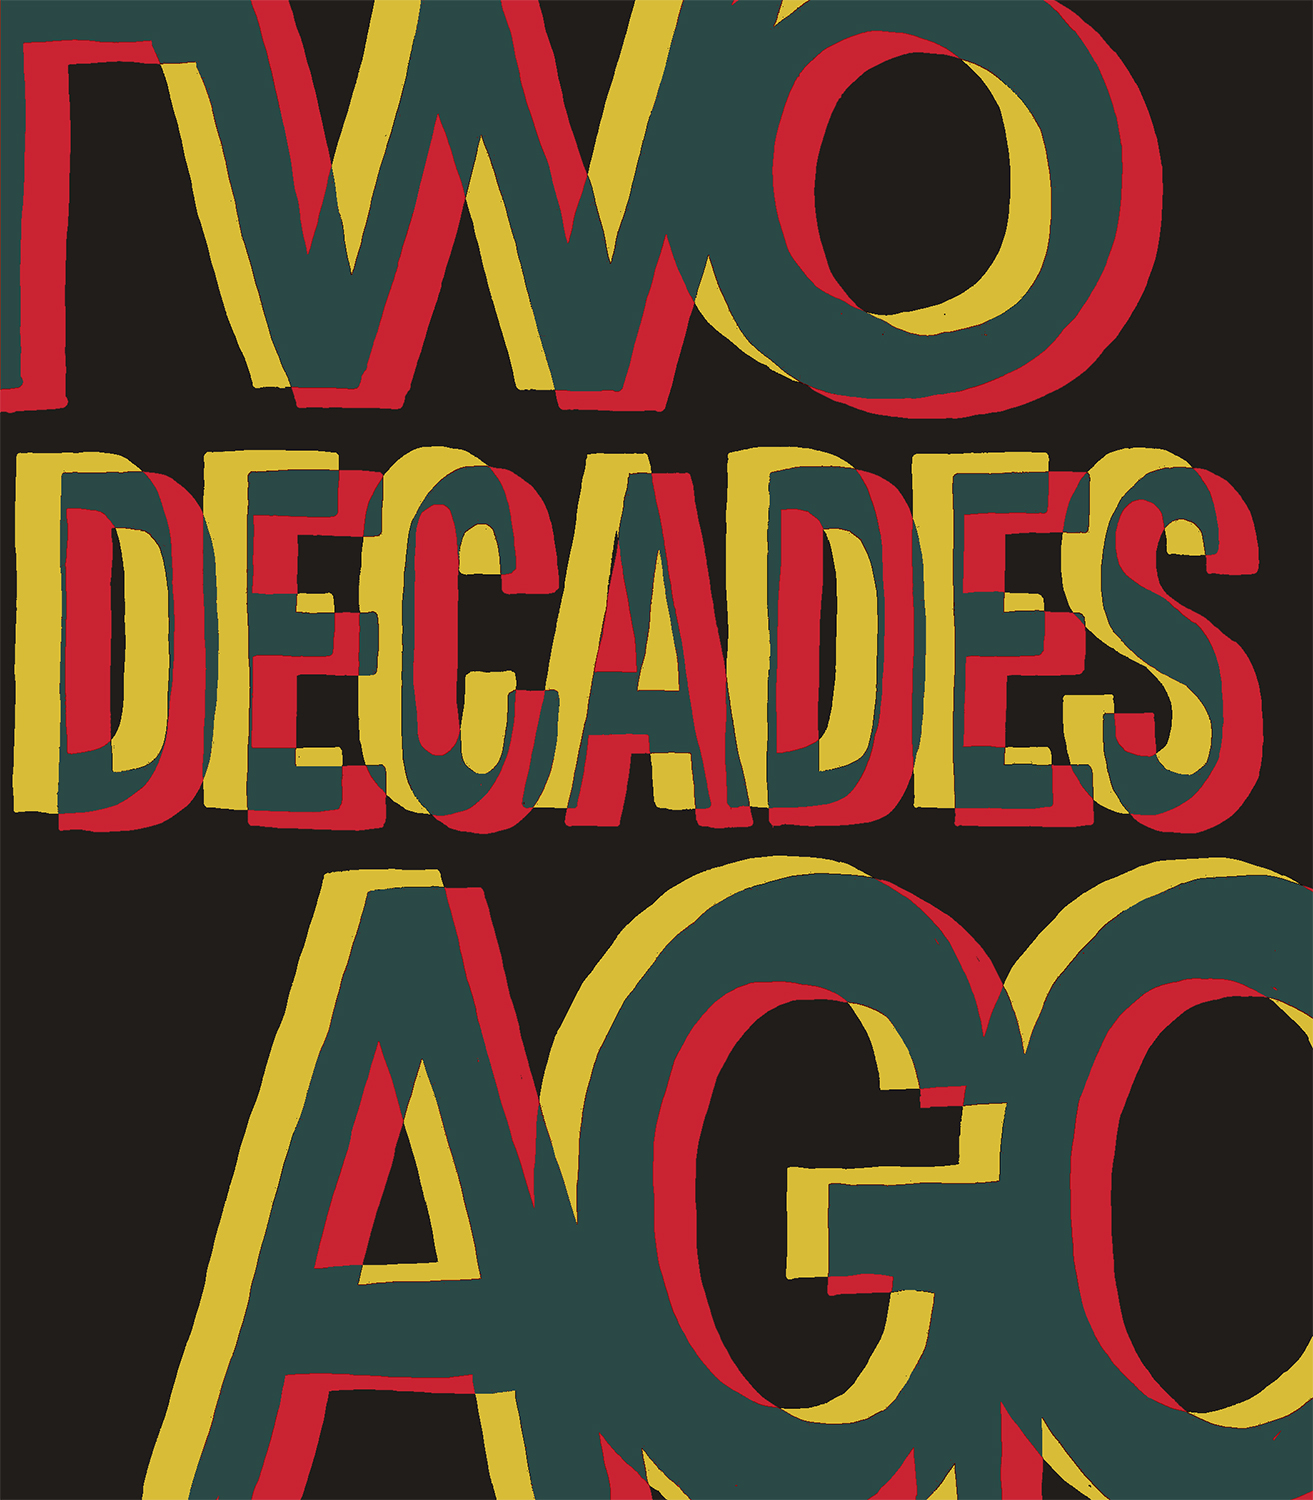 Large, 3-Dimensional block letters in green, yellow, and red that read, "Two Decades Ago" from top to bottom.